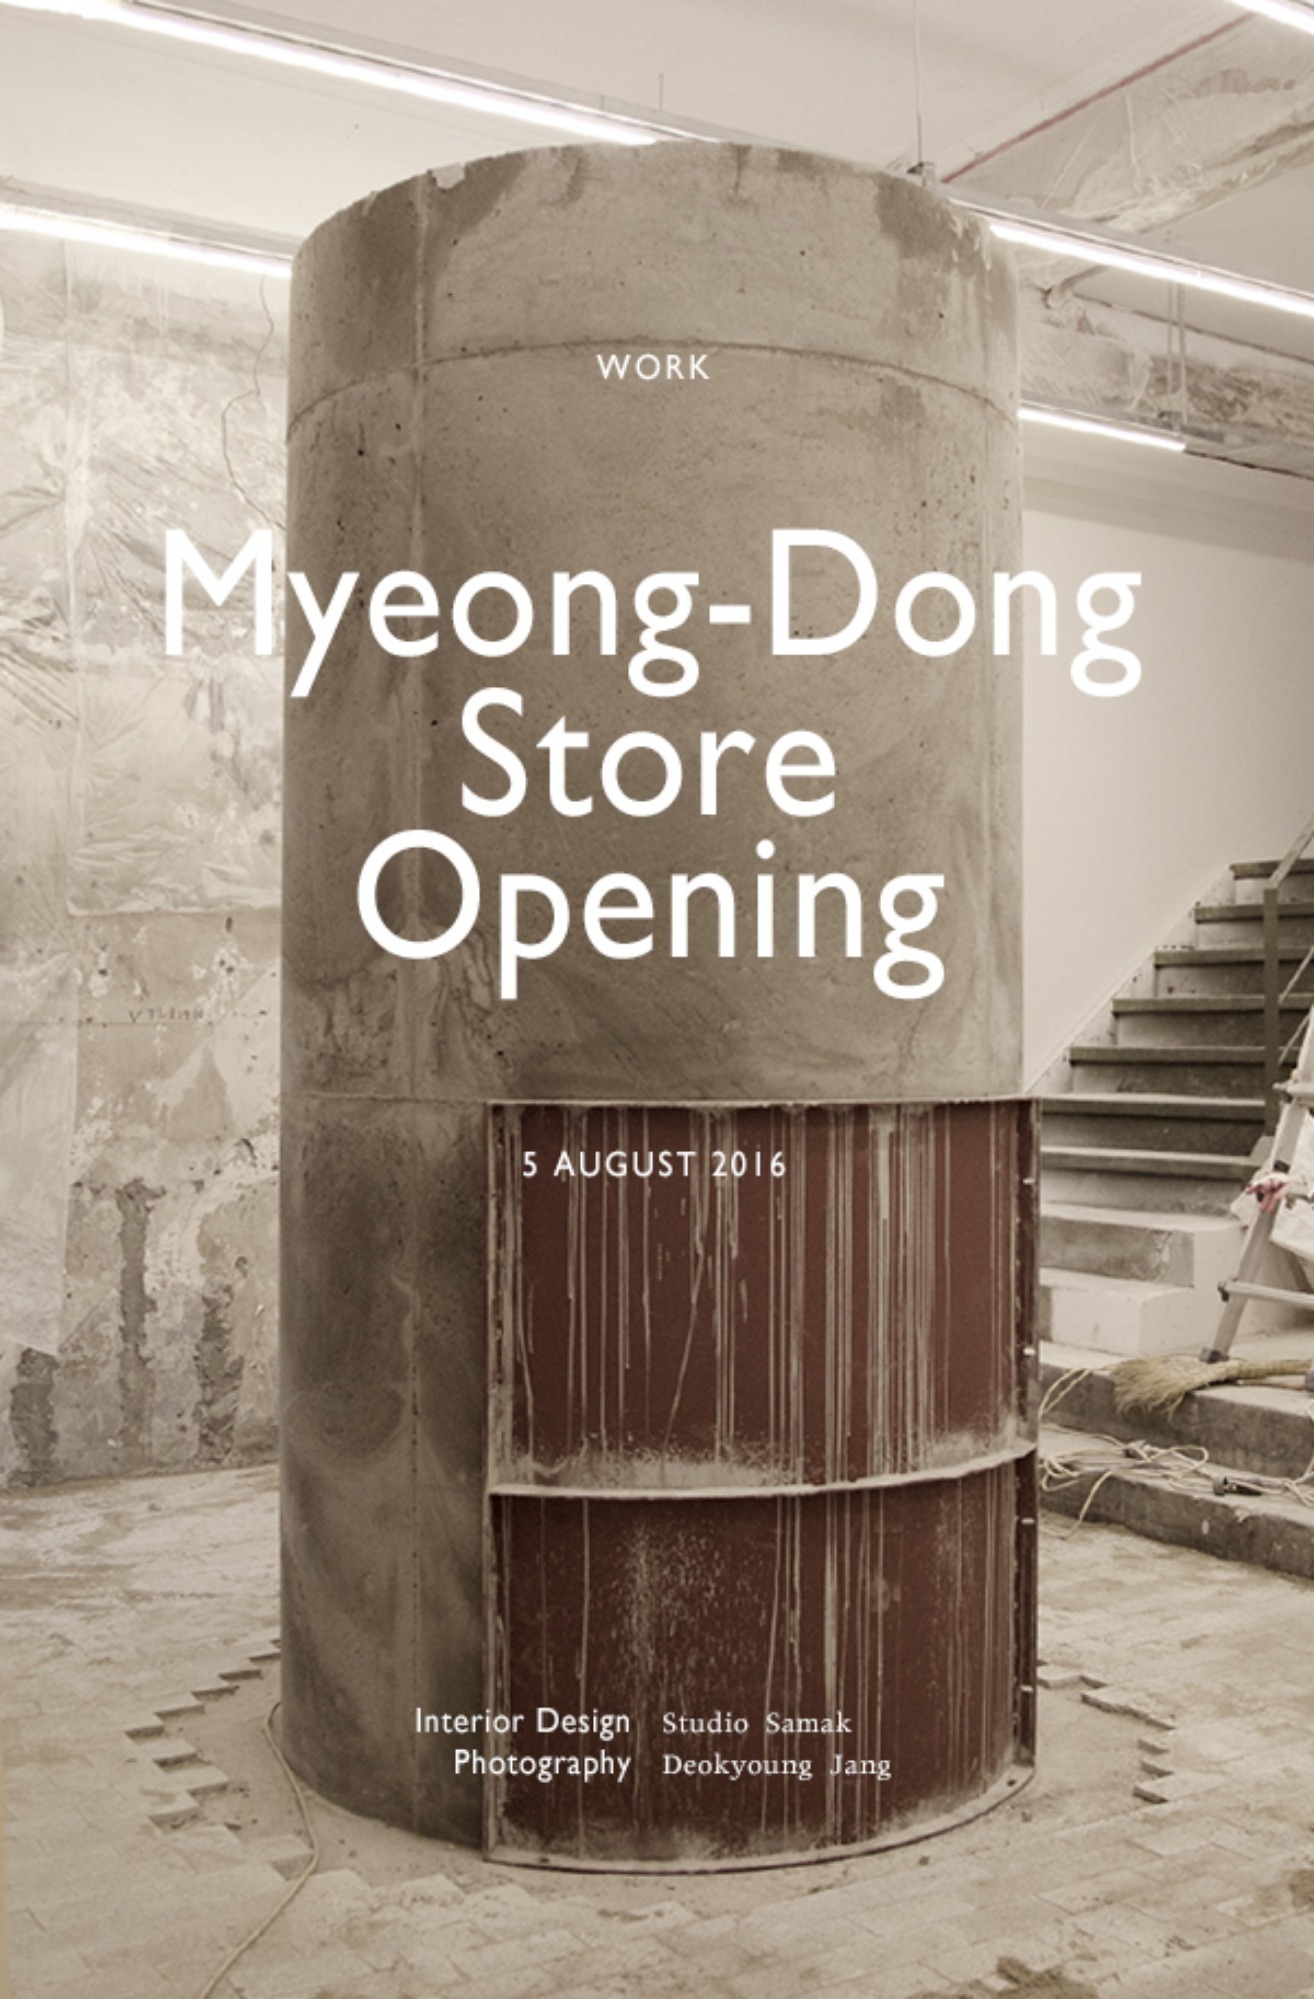 Myeong-Dong Store Opening